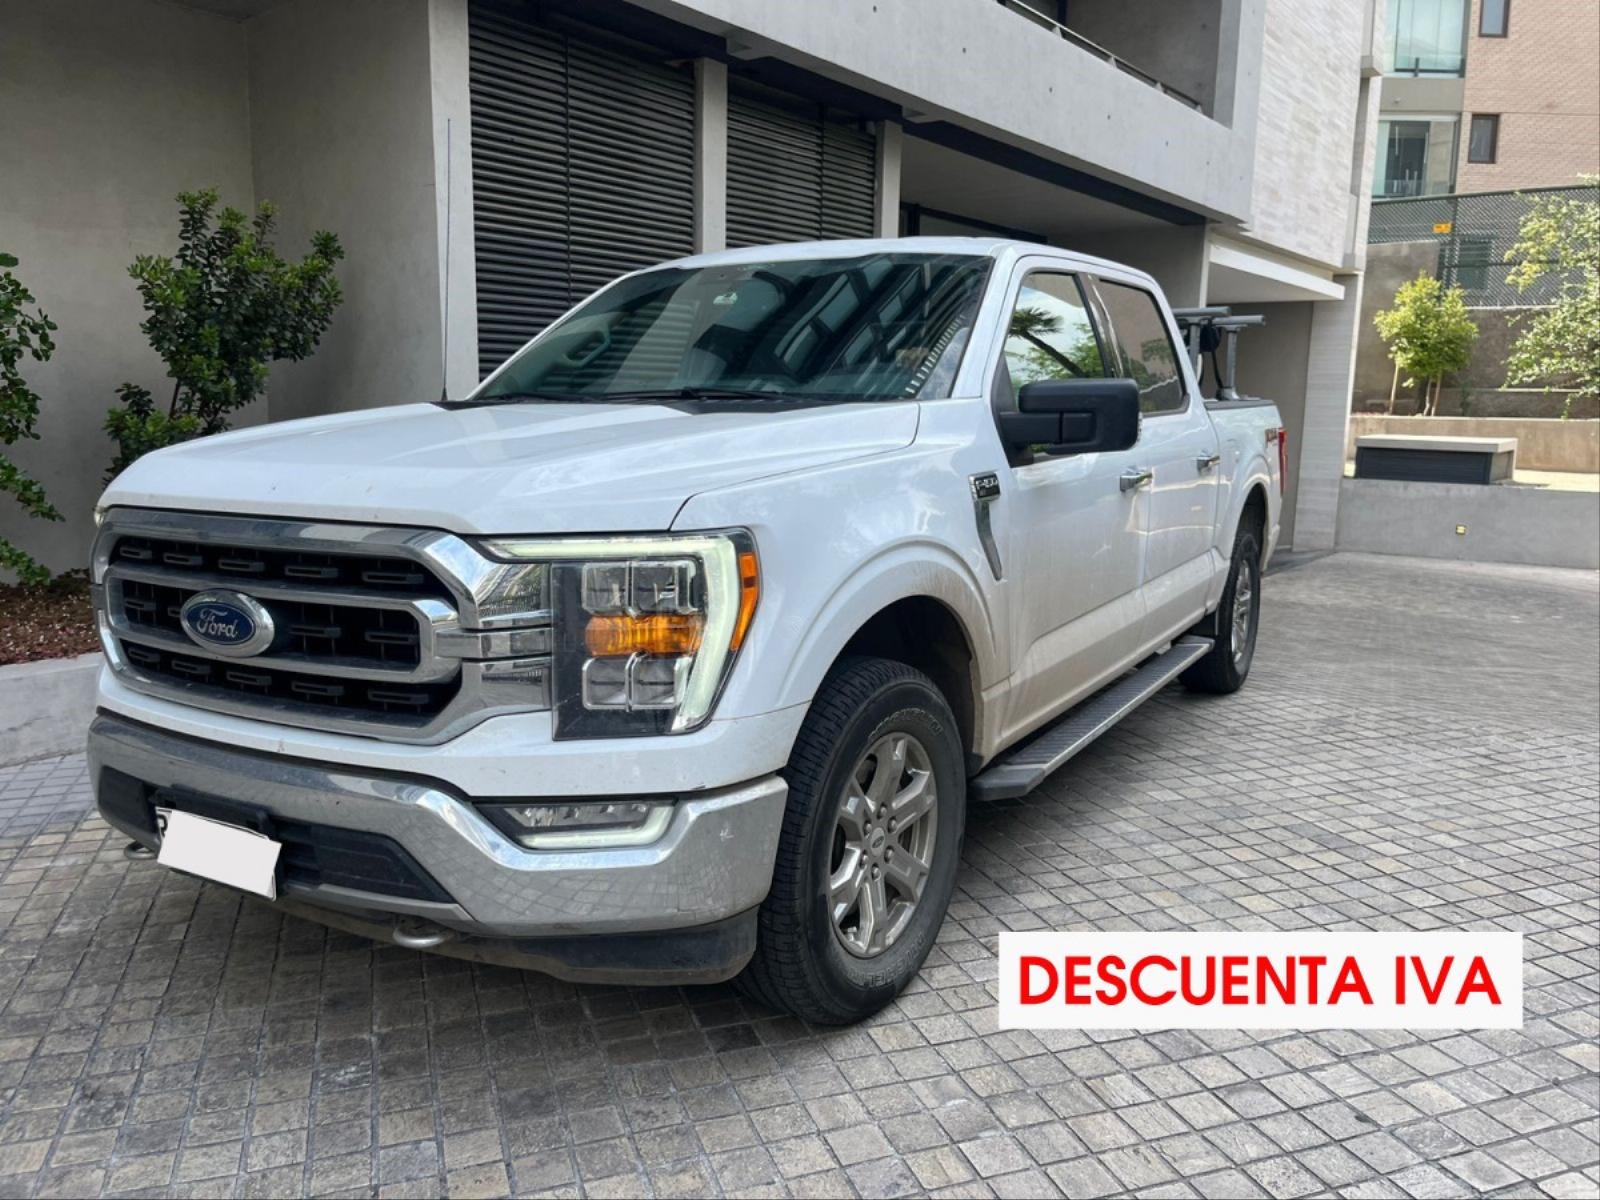 FORD F-150 FX4 XLT 5.0 AT 2020 DESCUENTA IVA - 